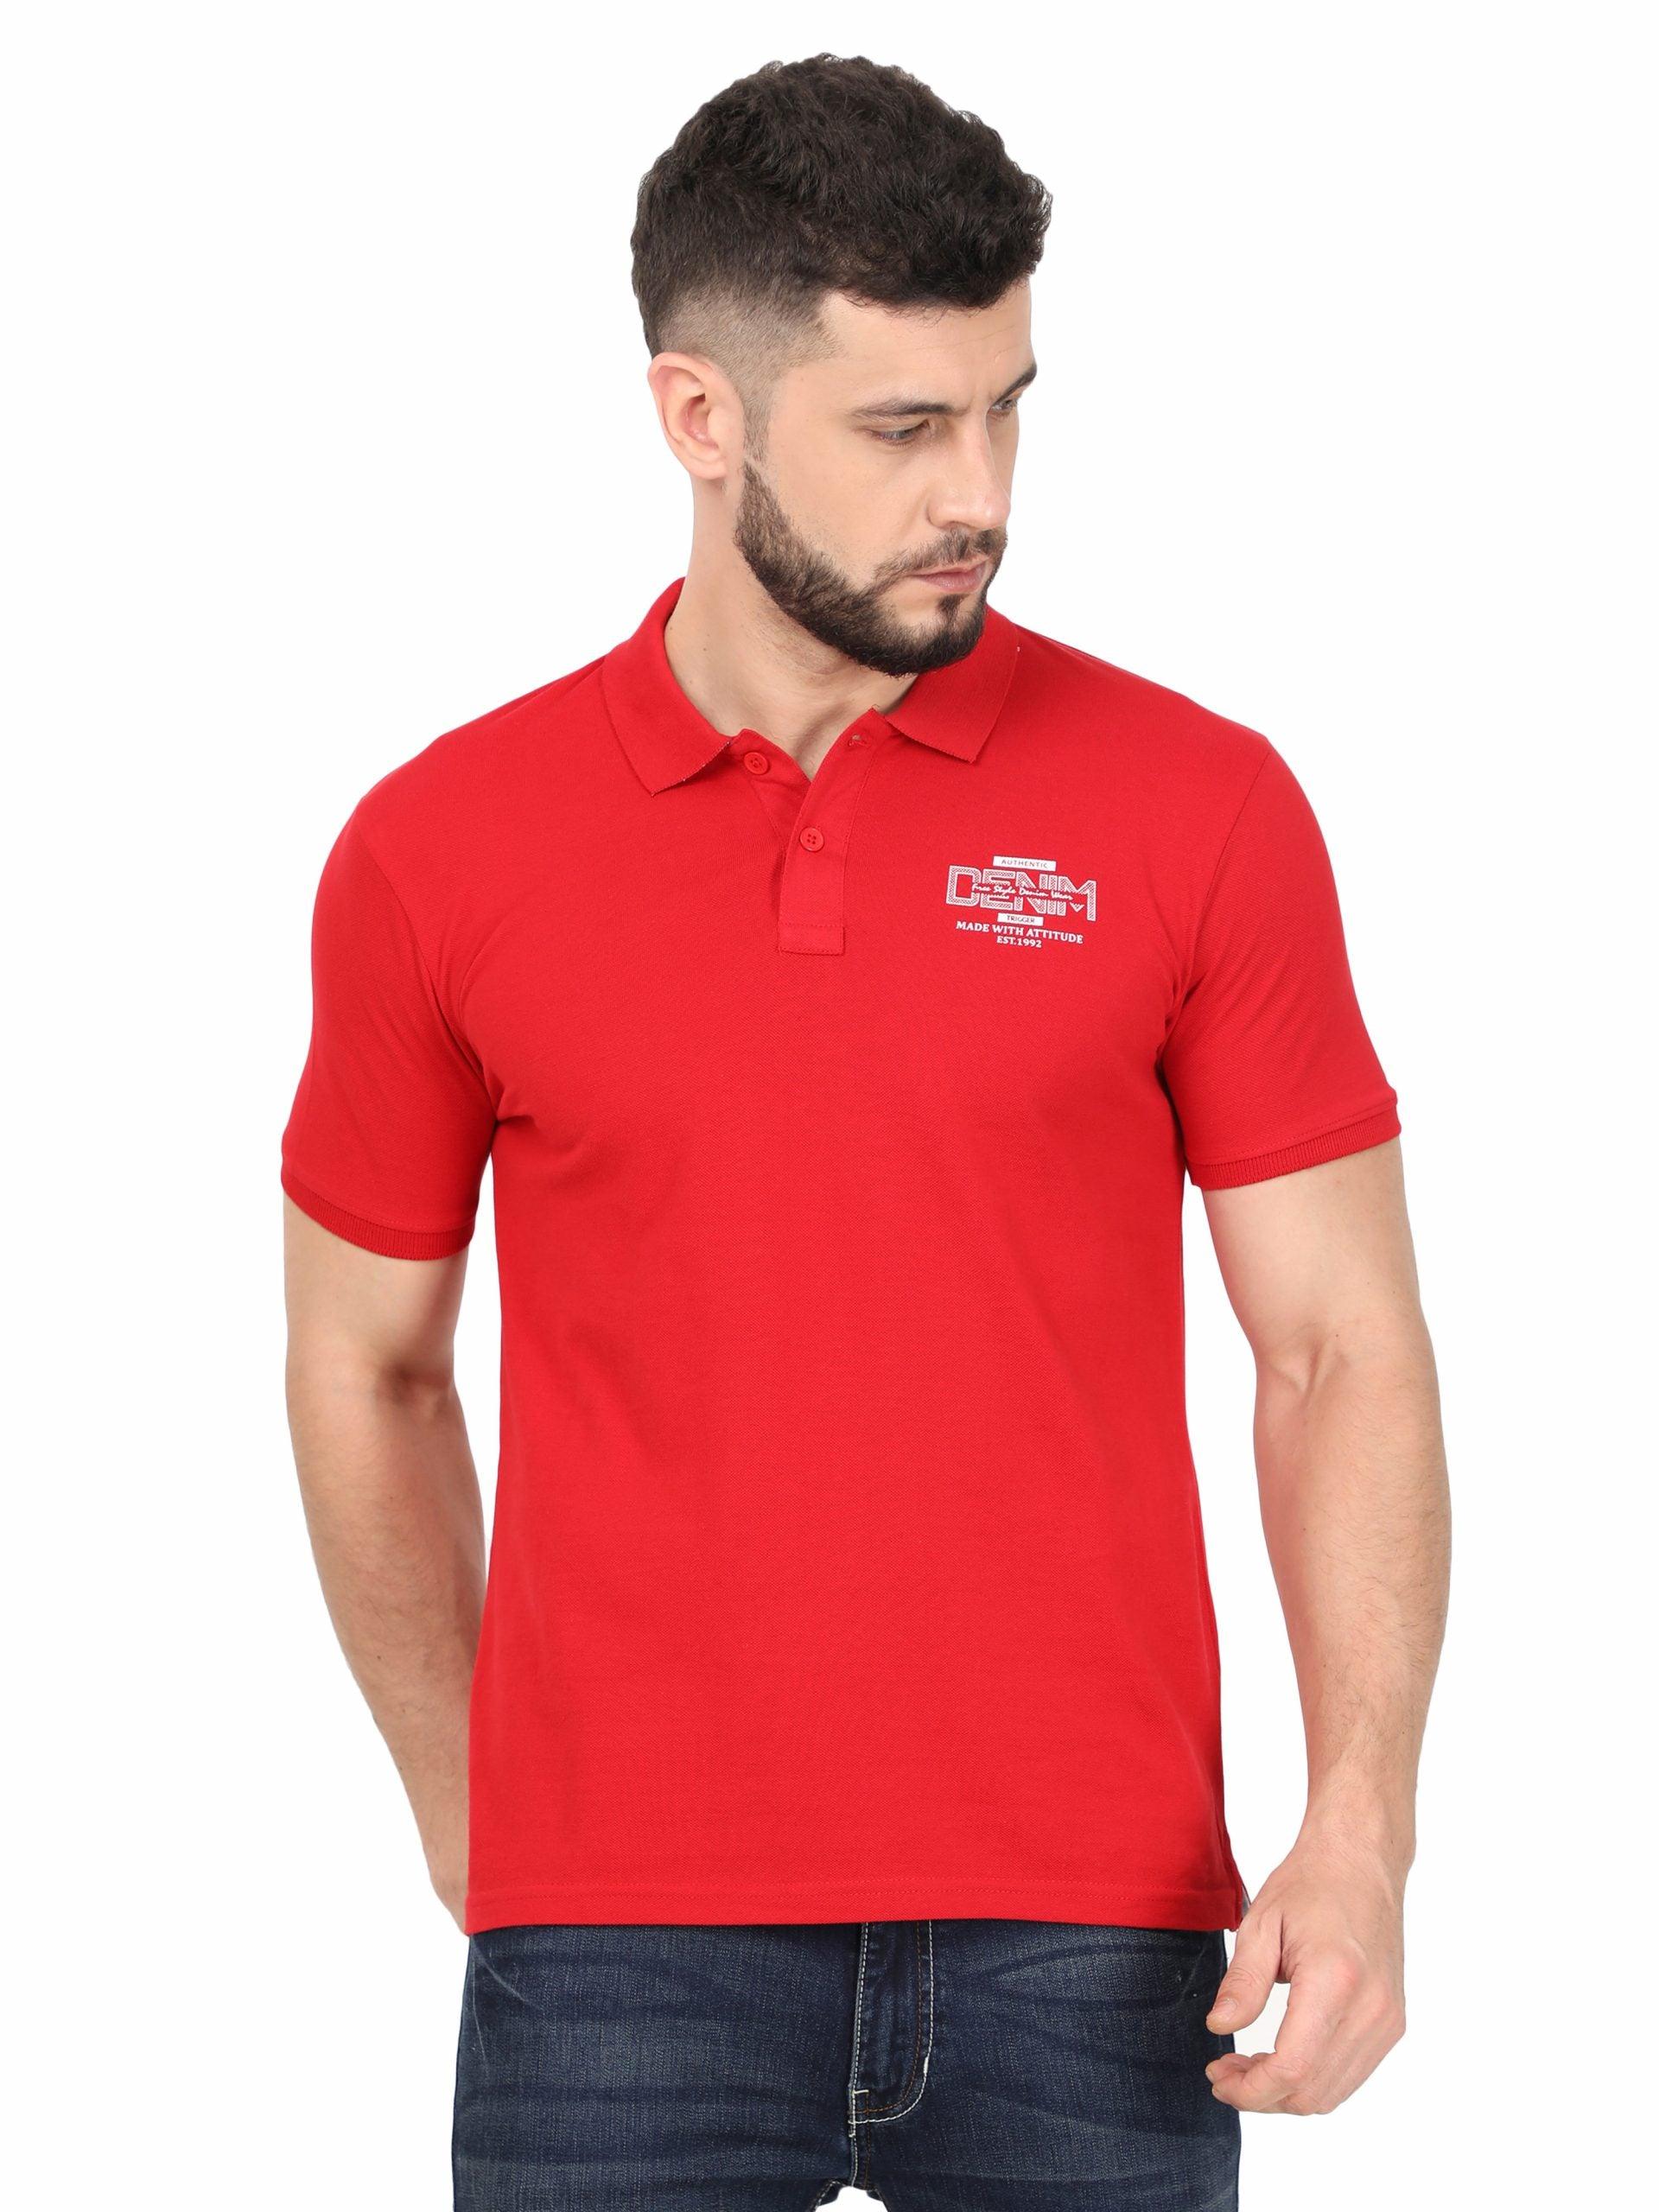 men's red t shirts